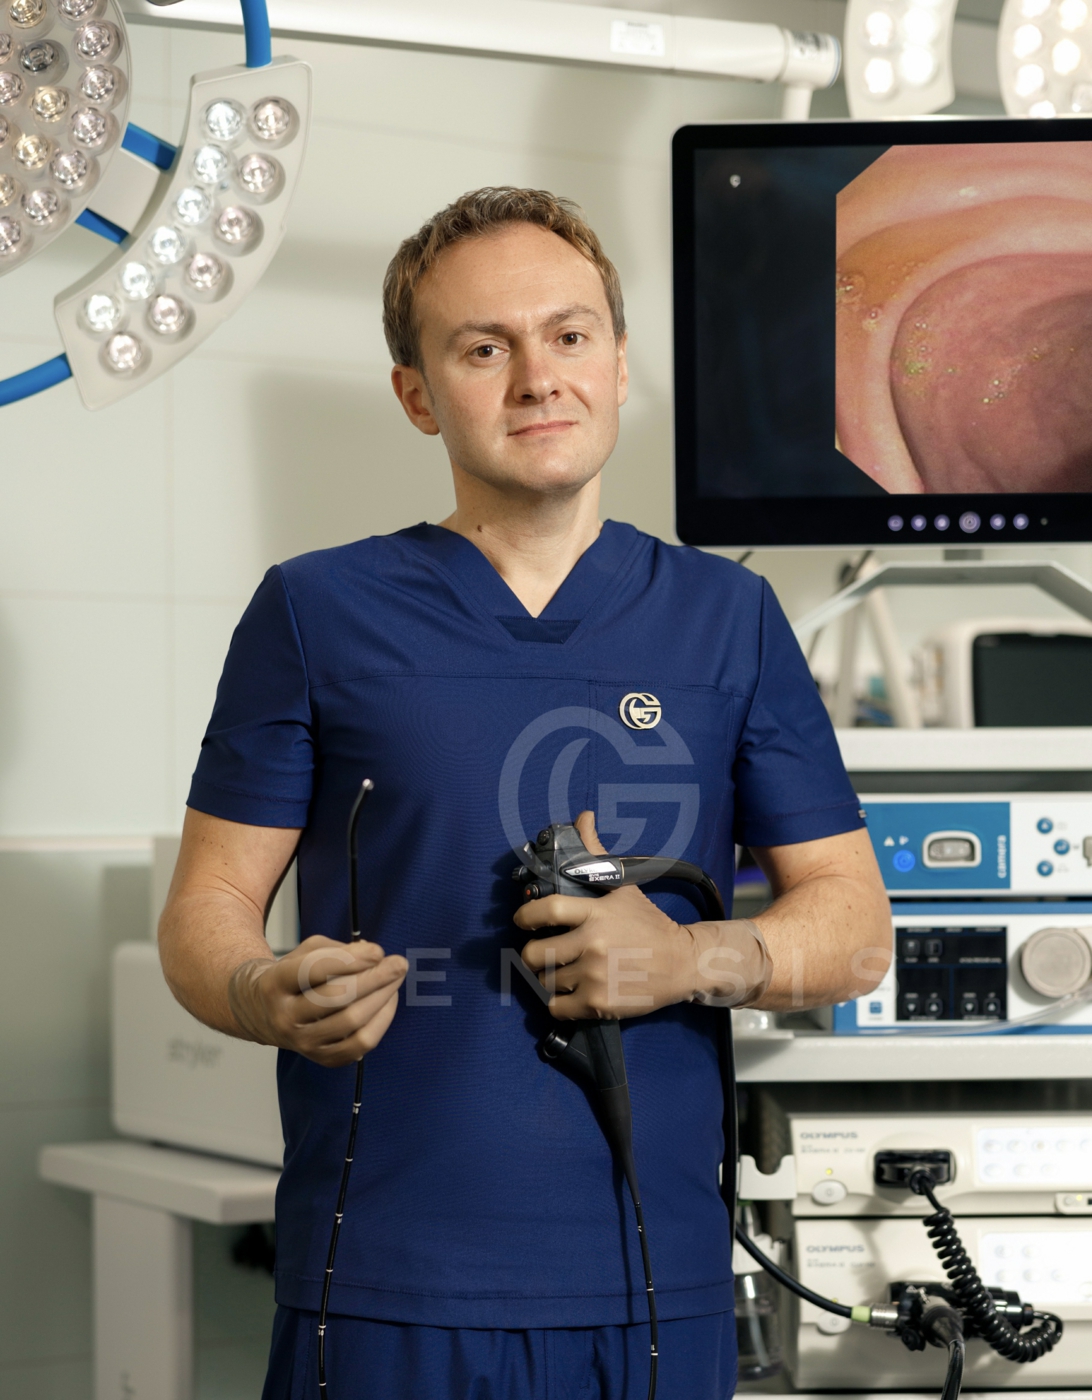 <p>&nbsp;</p>

<p style="text-align:center"><span style="color:#000000"><span style="font-size:26px">HOW THE PROCEDURE OF INTRAGASTRIC BALLOON ENDOSCOPIC INSTALLATION LOOKS LIKE ?</span></span></p>

<p>&nbsp;</p>
